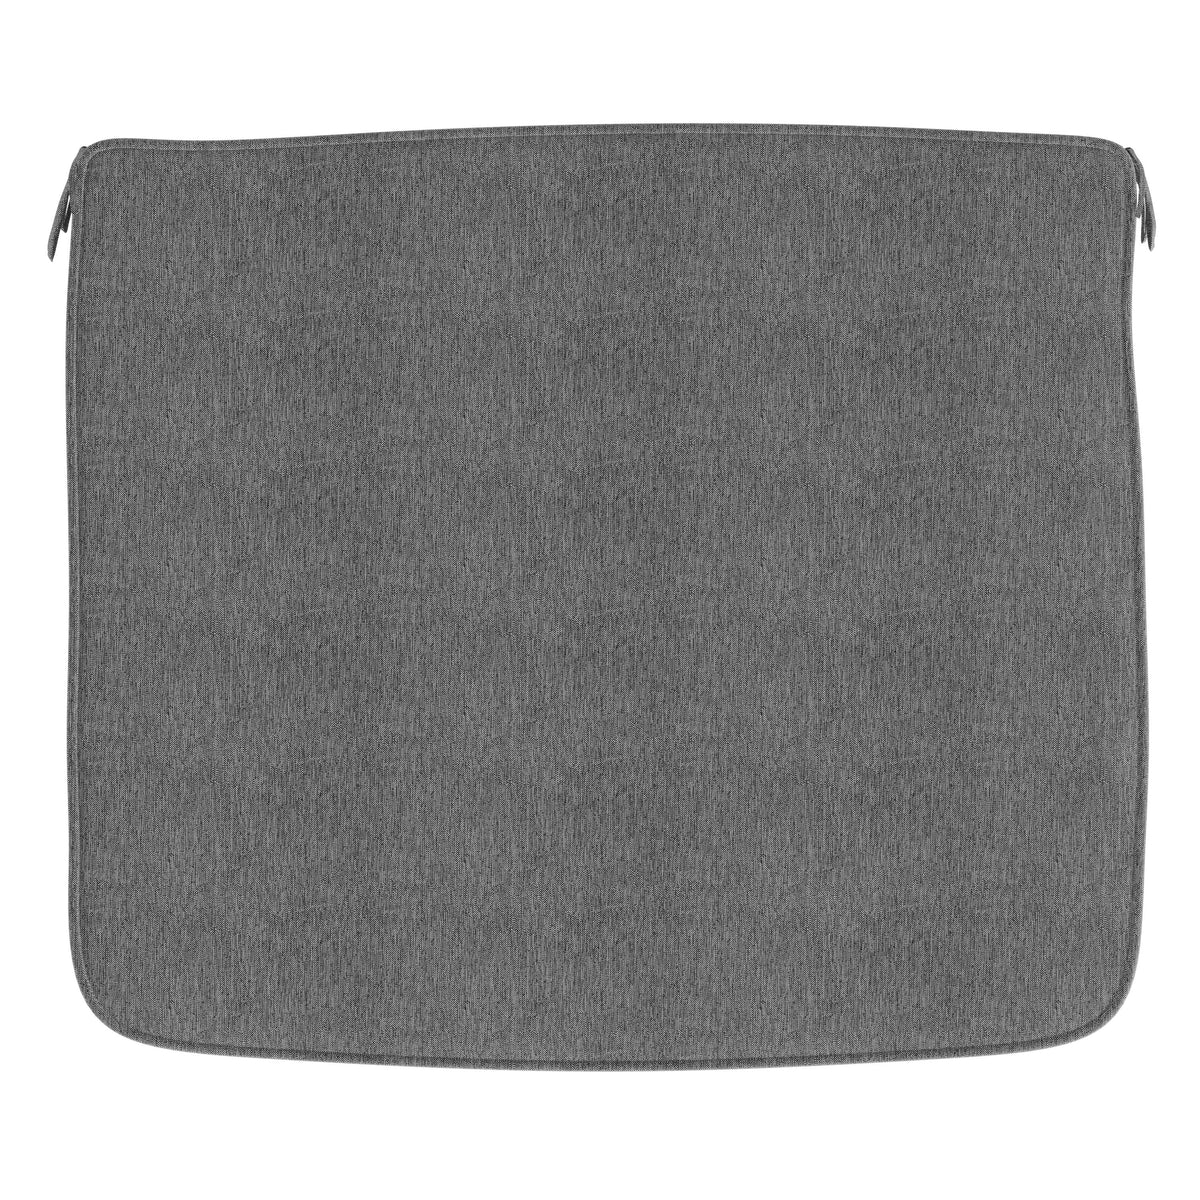 Gray |#| All-Weather Gray Non-Slip Chair Cushions with Ties & Comfort Foam Core - 2 Pack